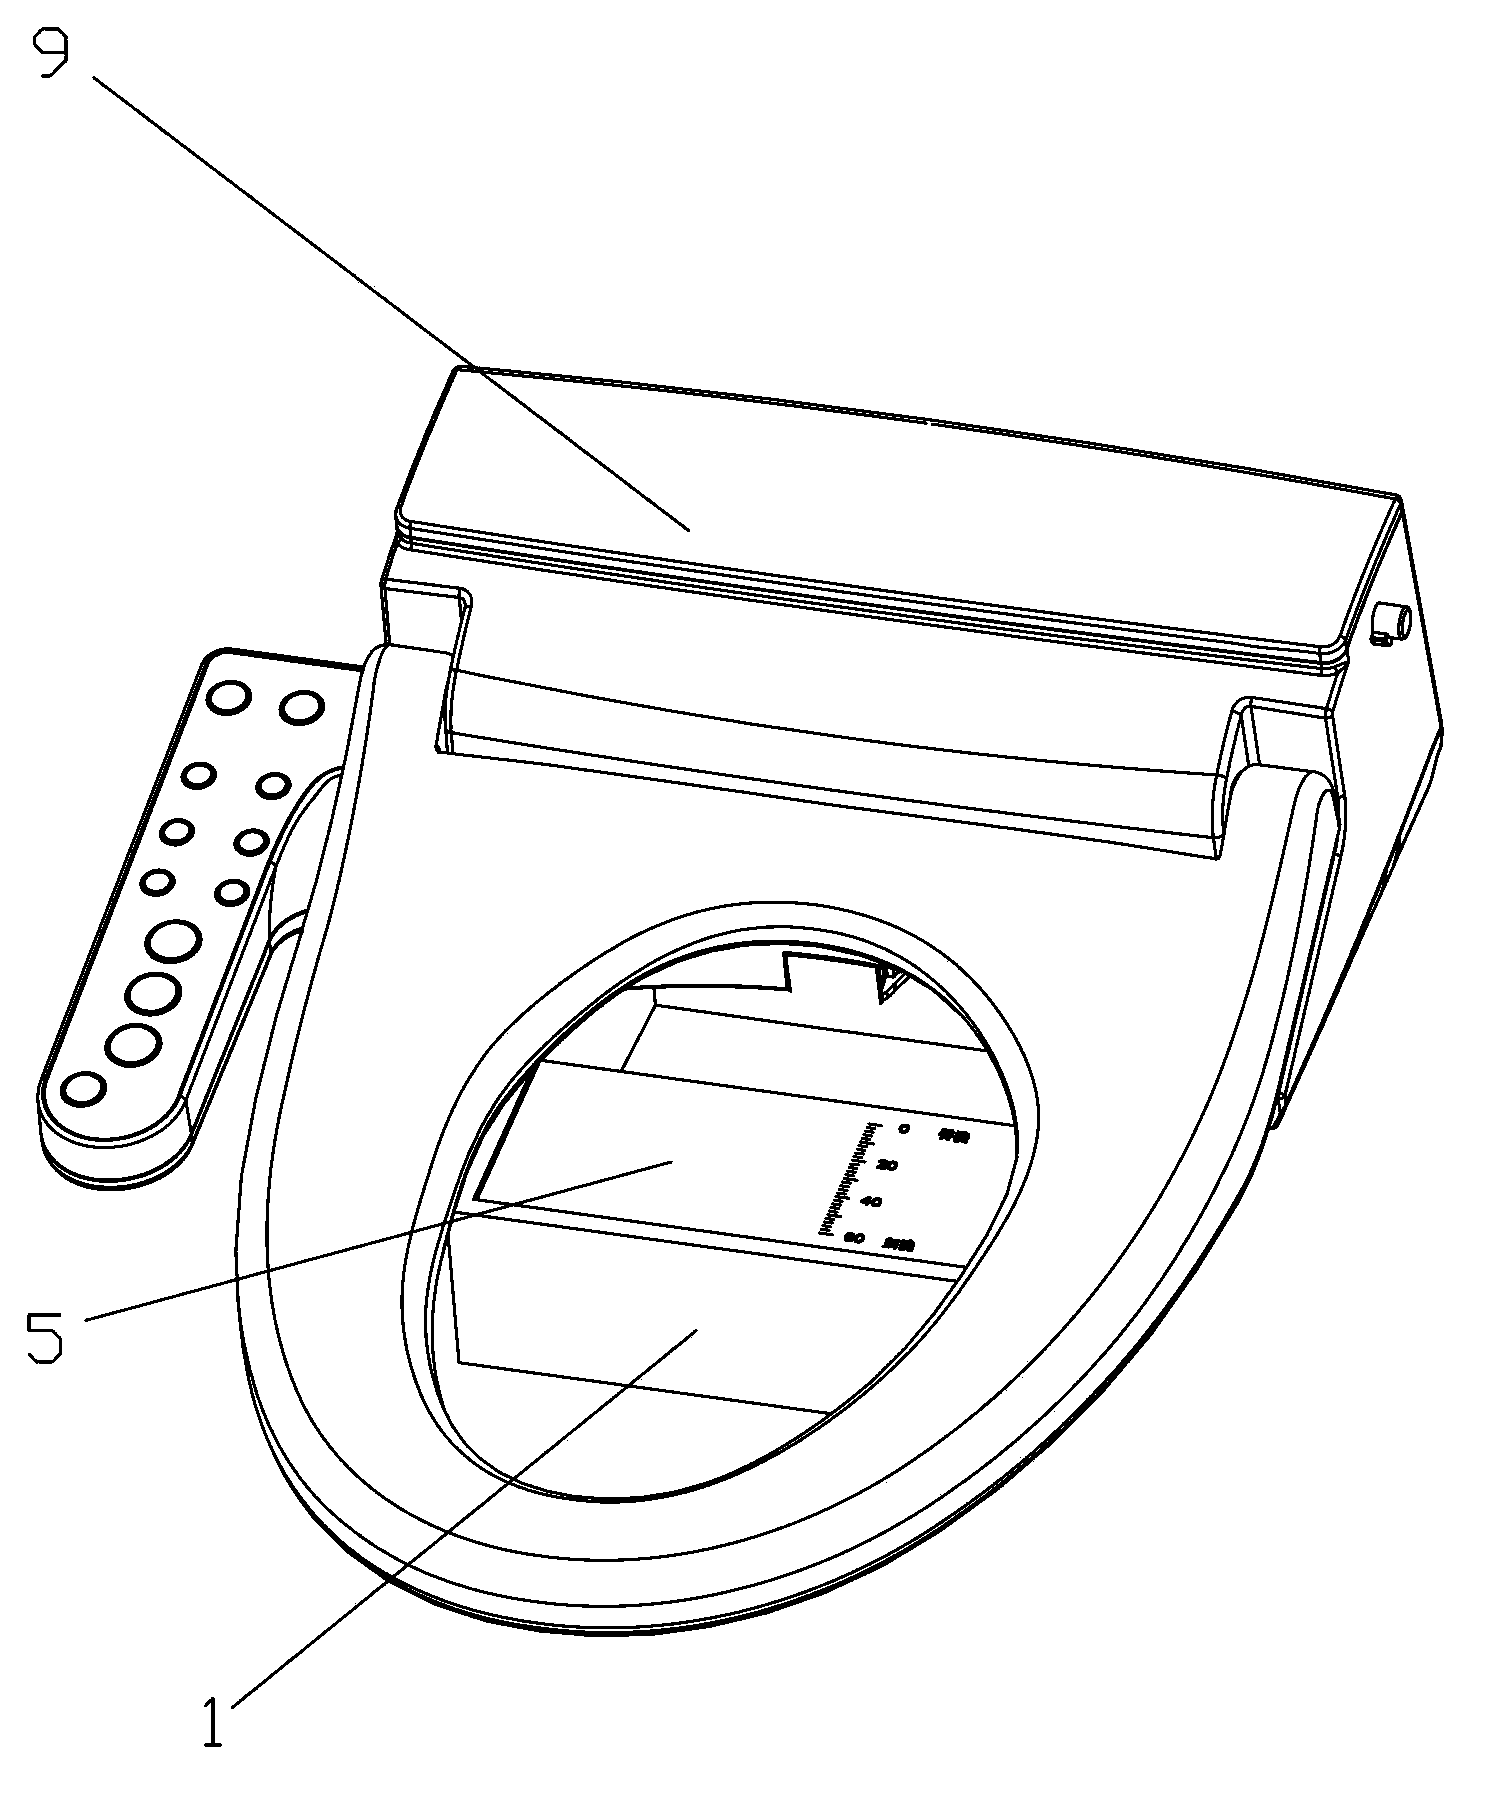 A water testing device for displaying the flushing function of the toilet seat